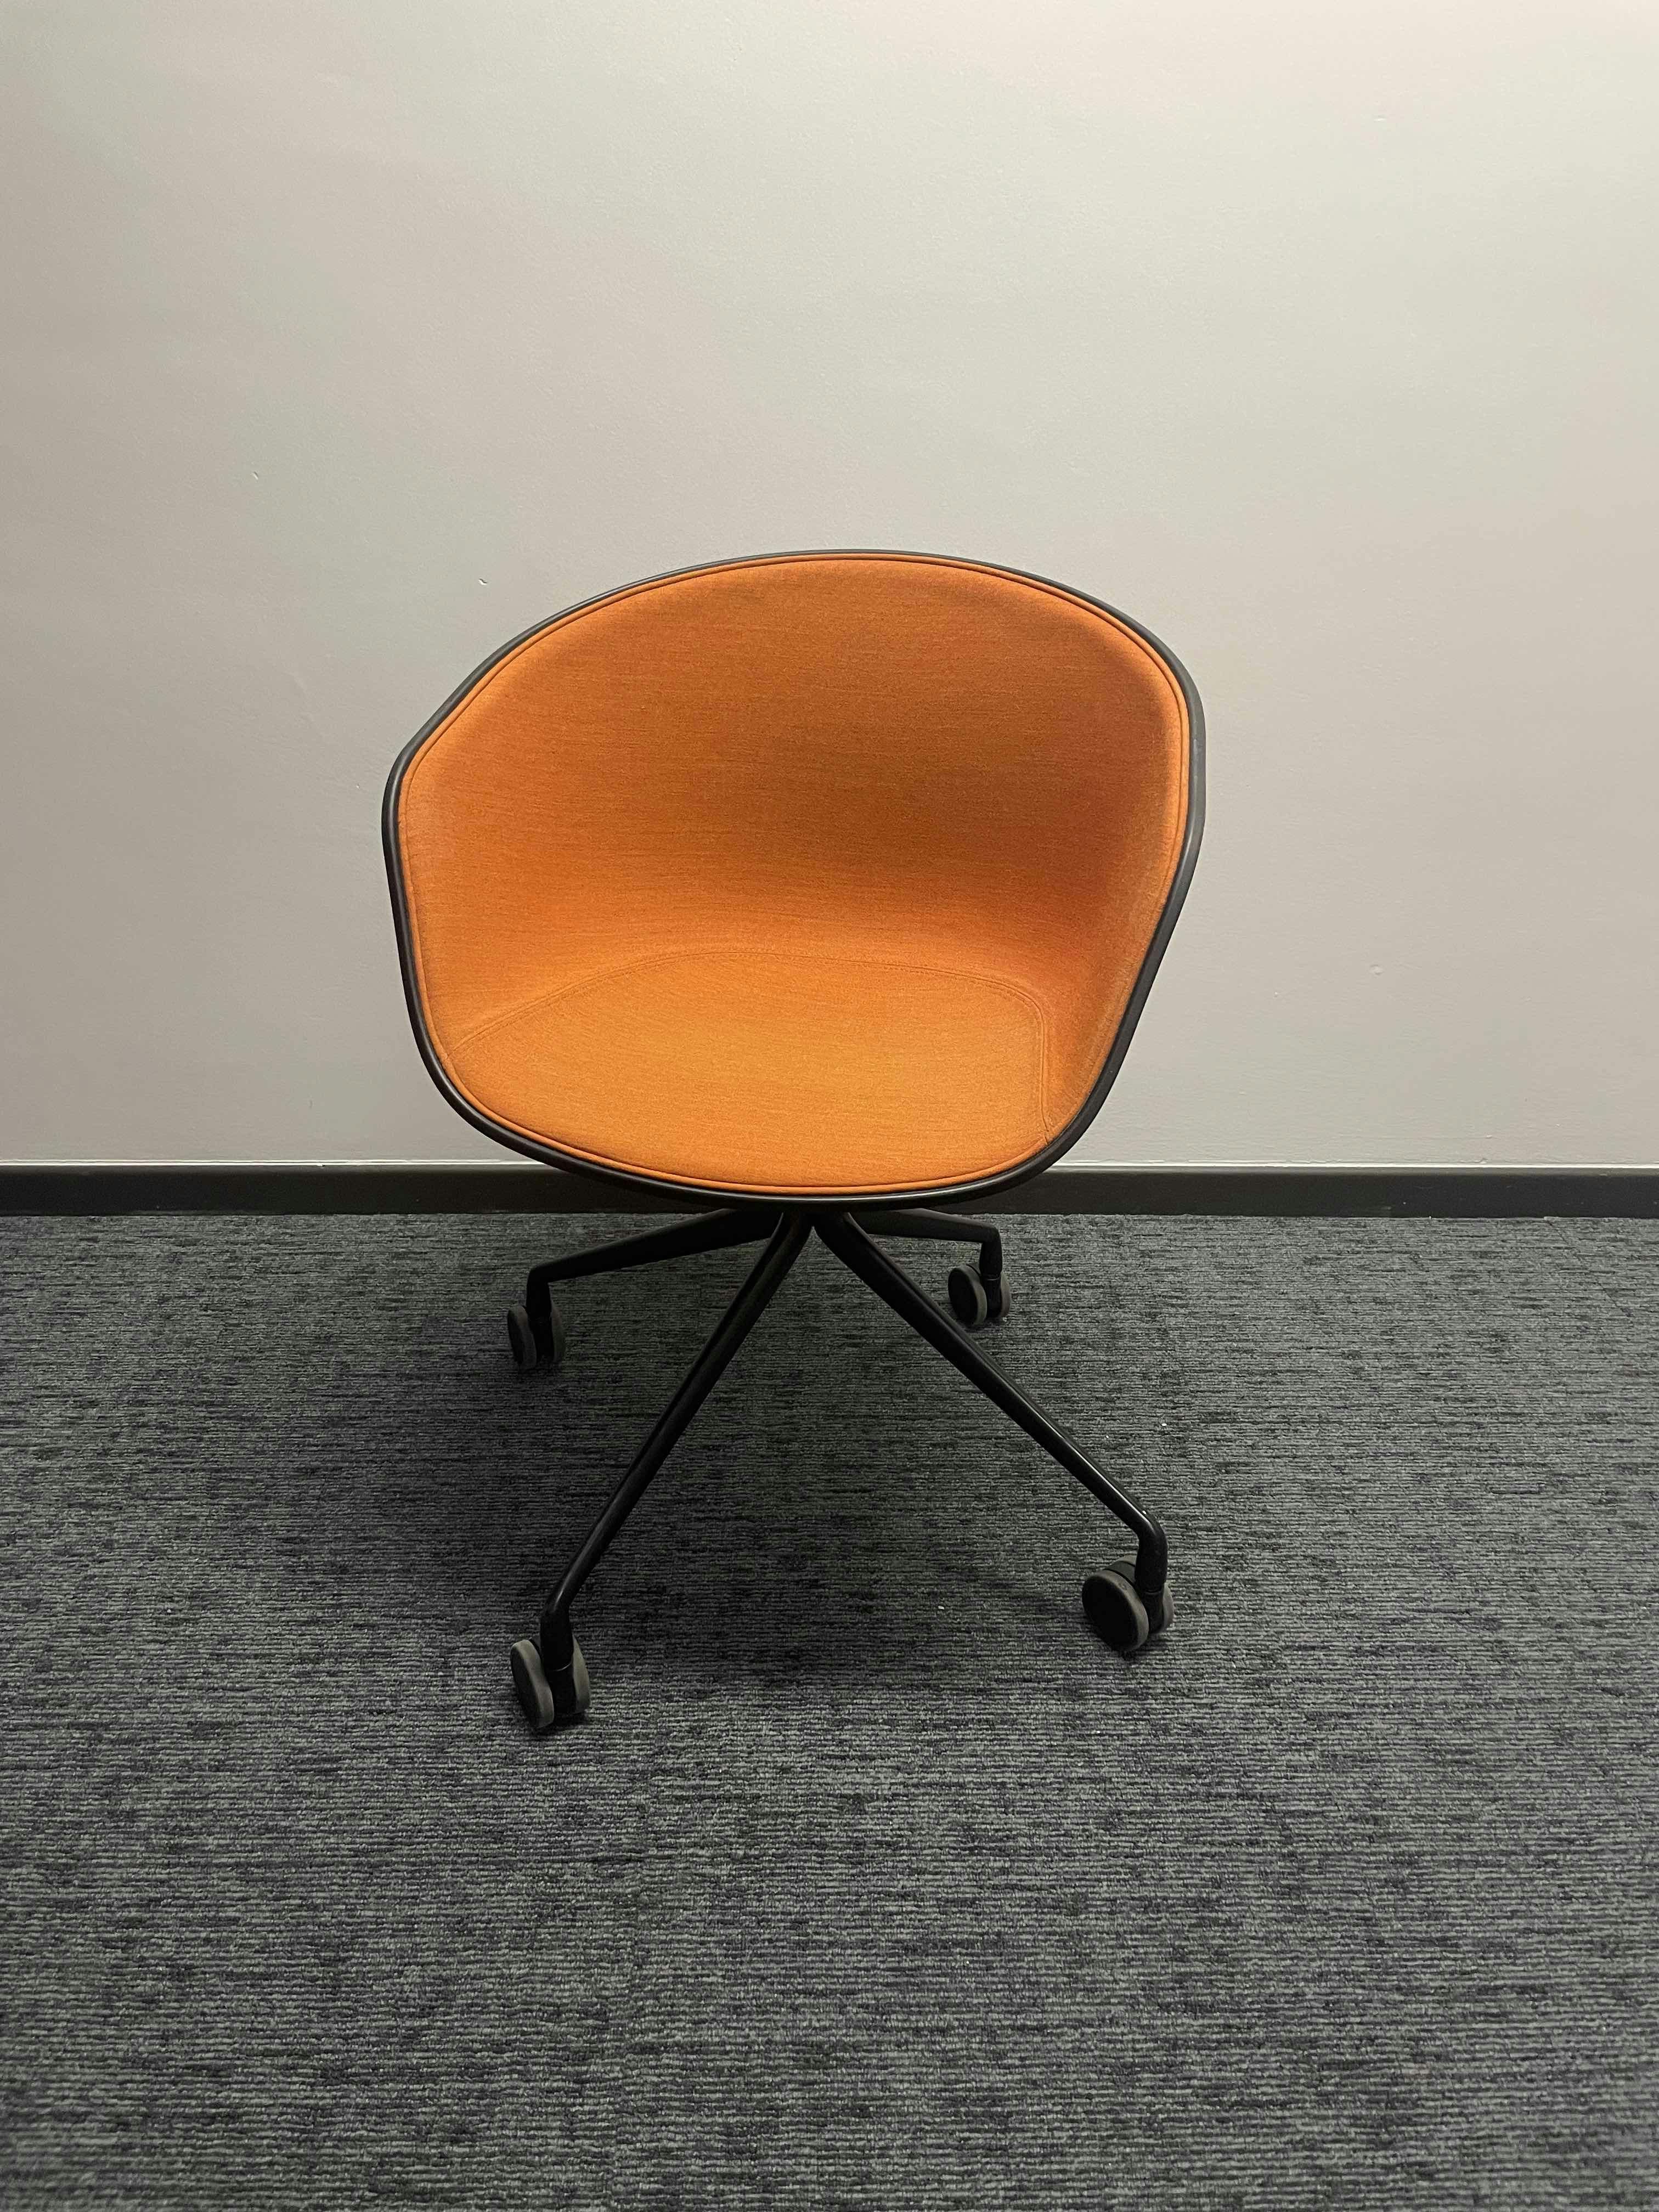 Orange and Black Chair Hay - Relieve Furniture